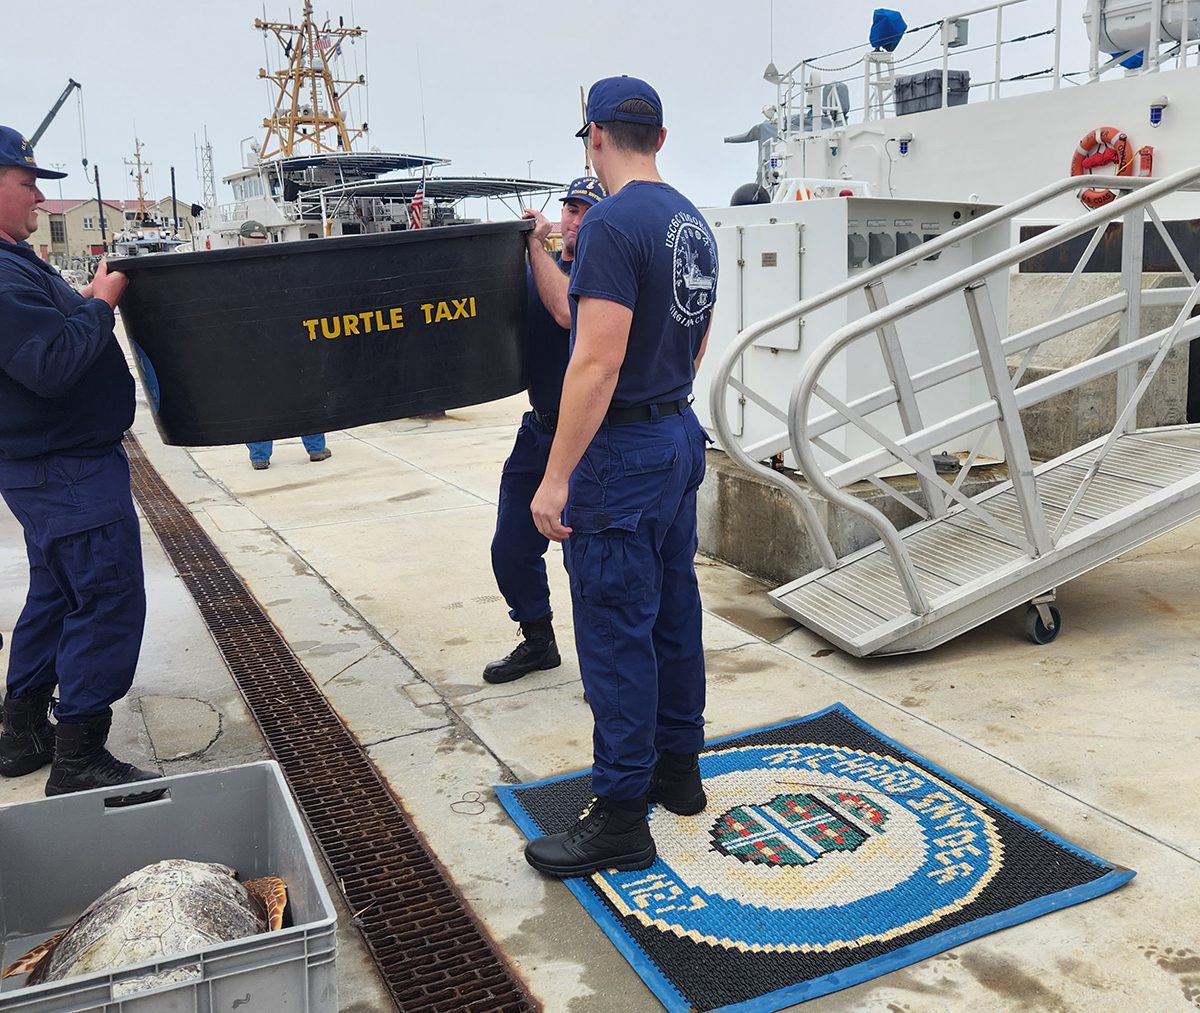 Rehabilitated cold-stunned sea turtles are loaded earlier this month aboard the cutter Richard Snyder at Coast Guard Station Fort Macon for release at sea. Photo: NC Aquariums